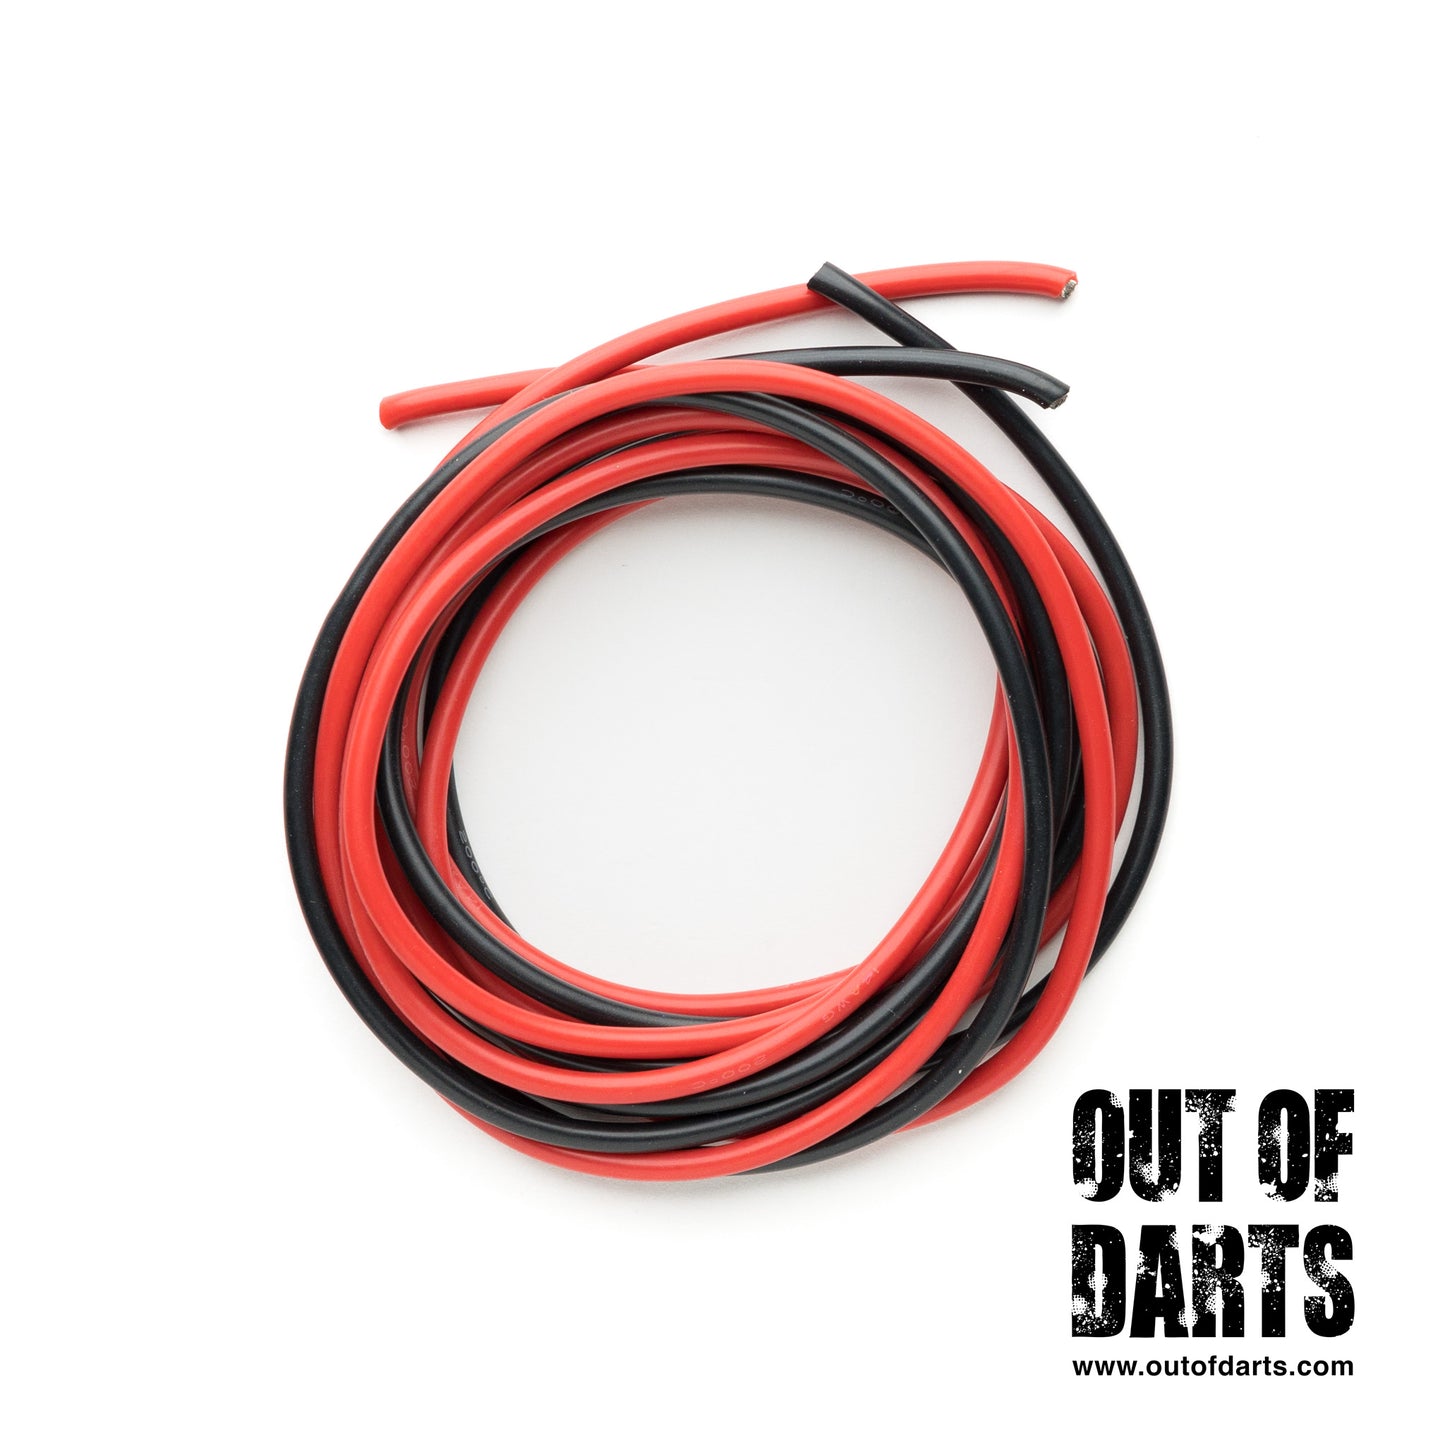 5' Hobby Wire (3 sizes: 14AWG, 16AWG, 18AWG)